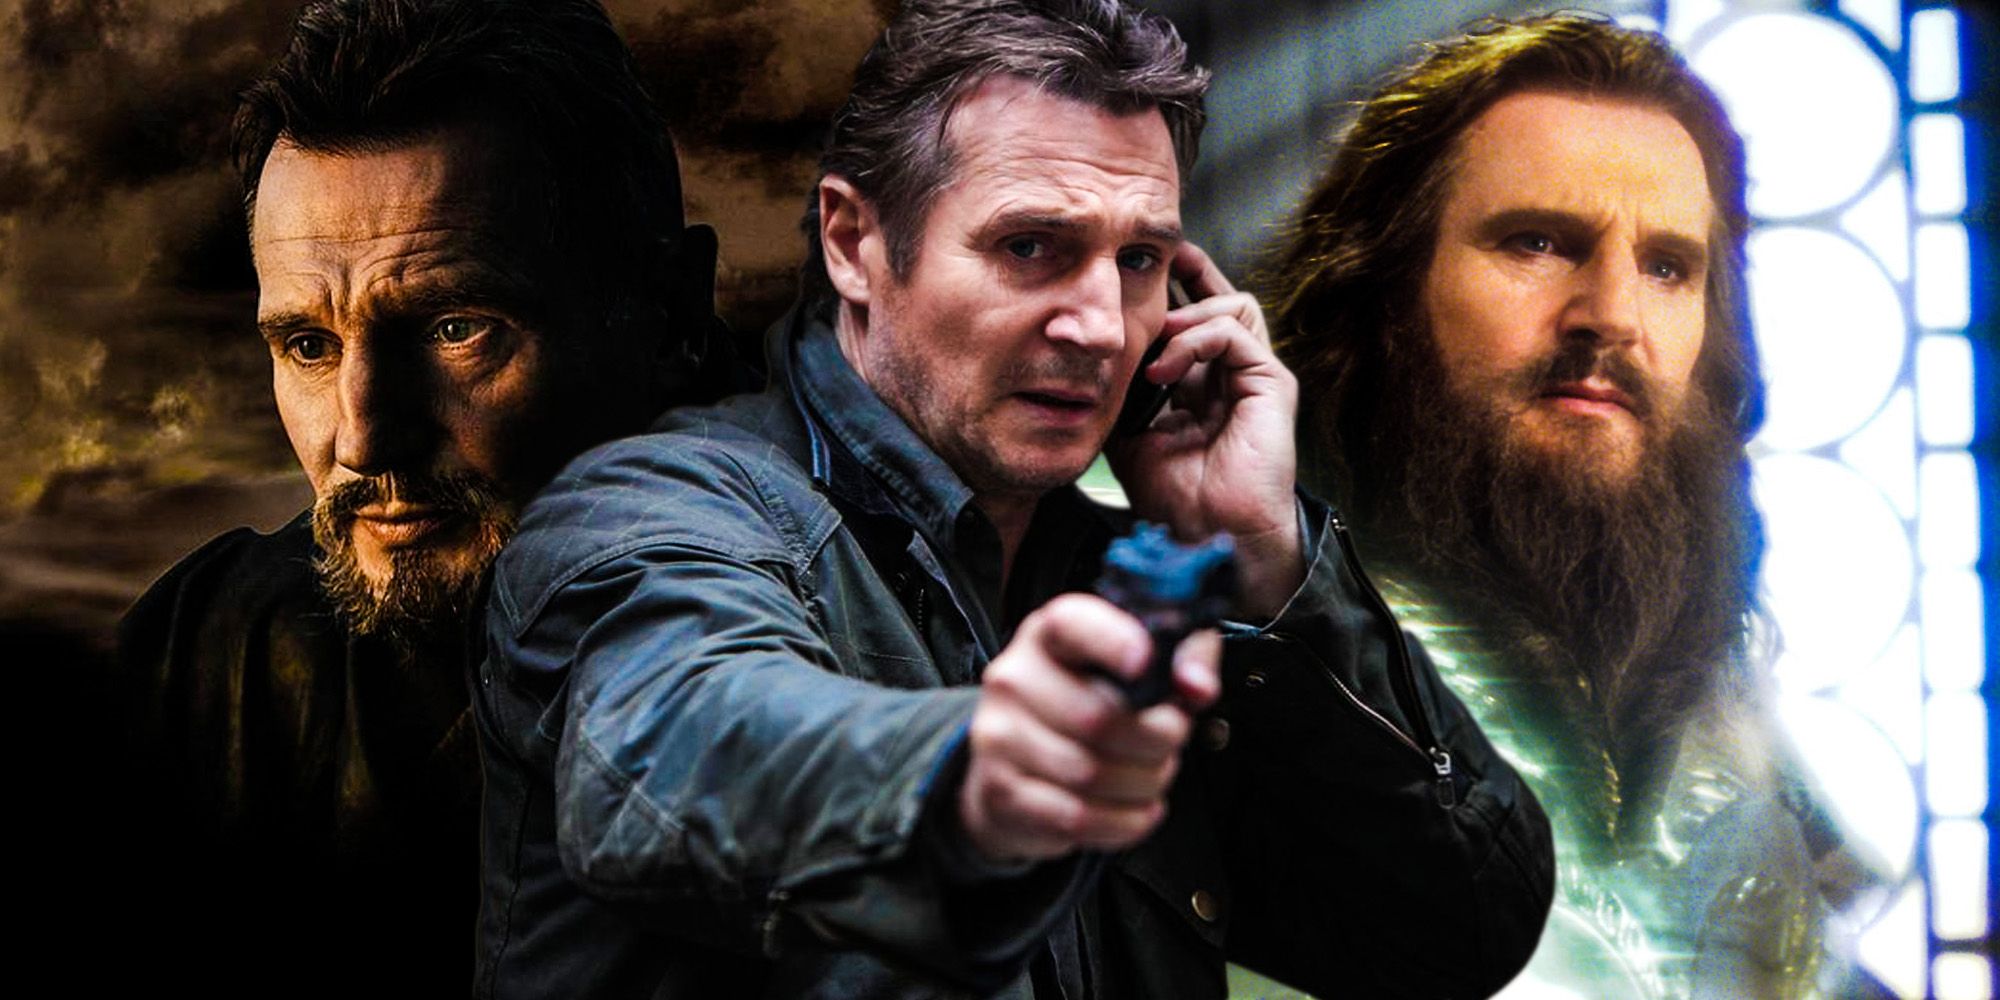 Every Liam Neeson Movie Ranked From Worst To Best